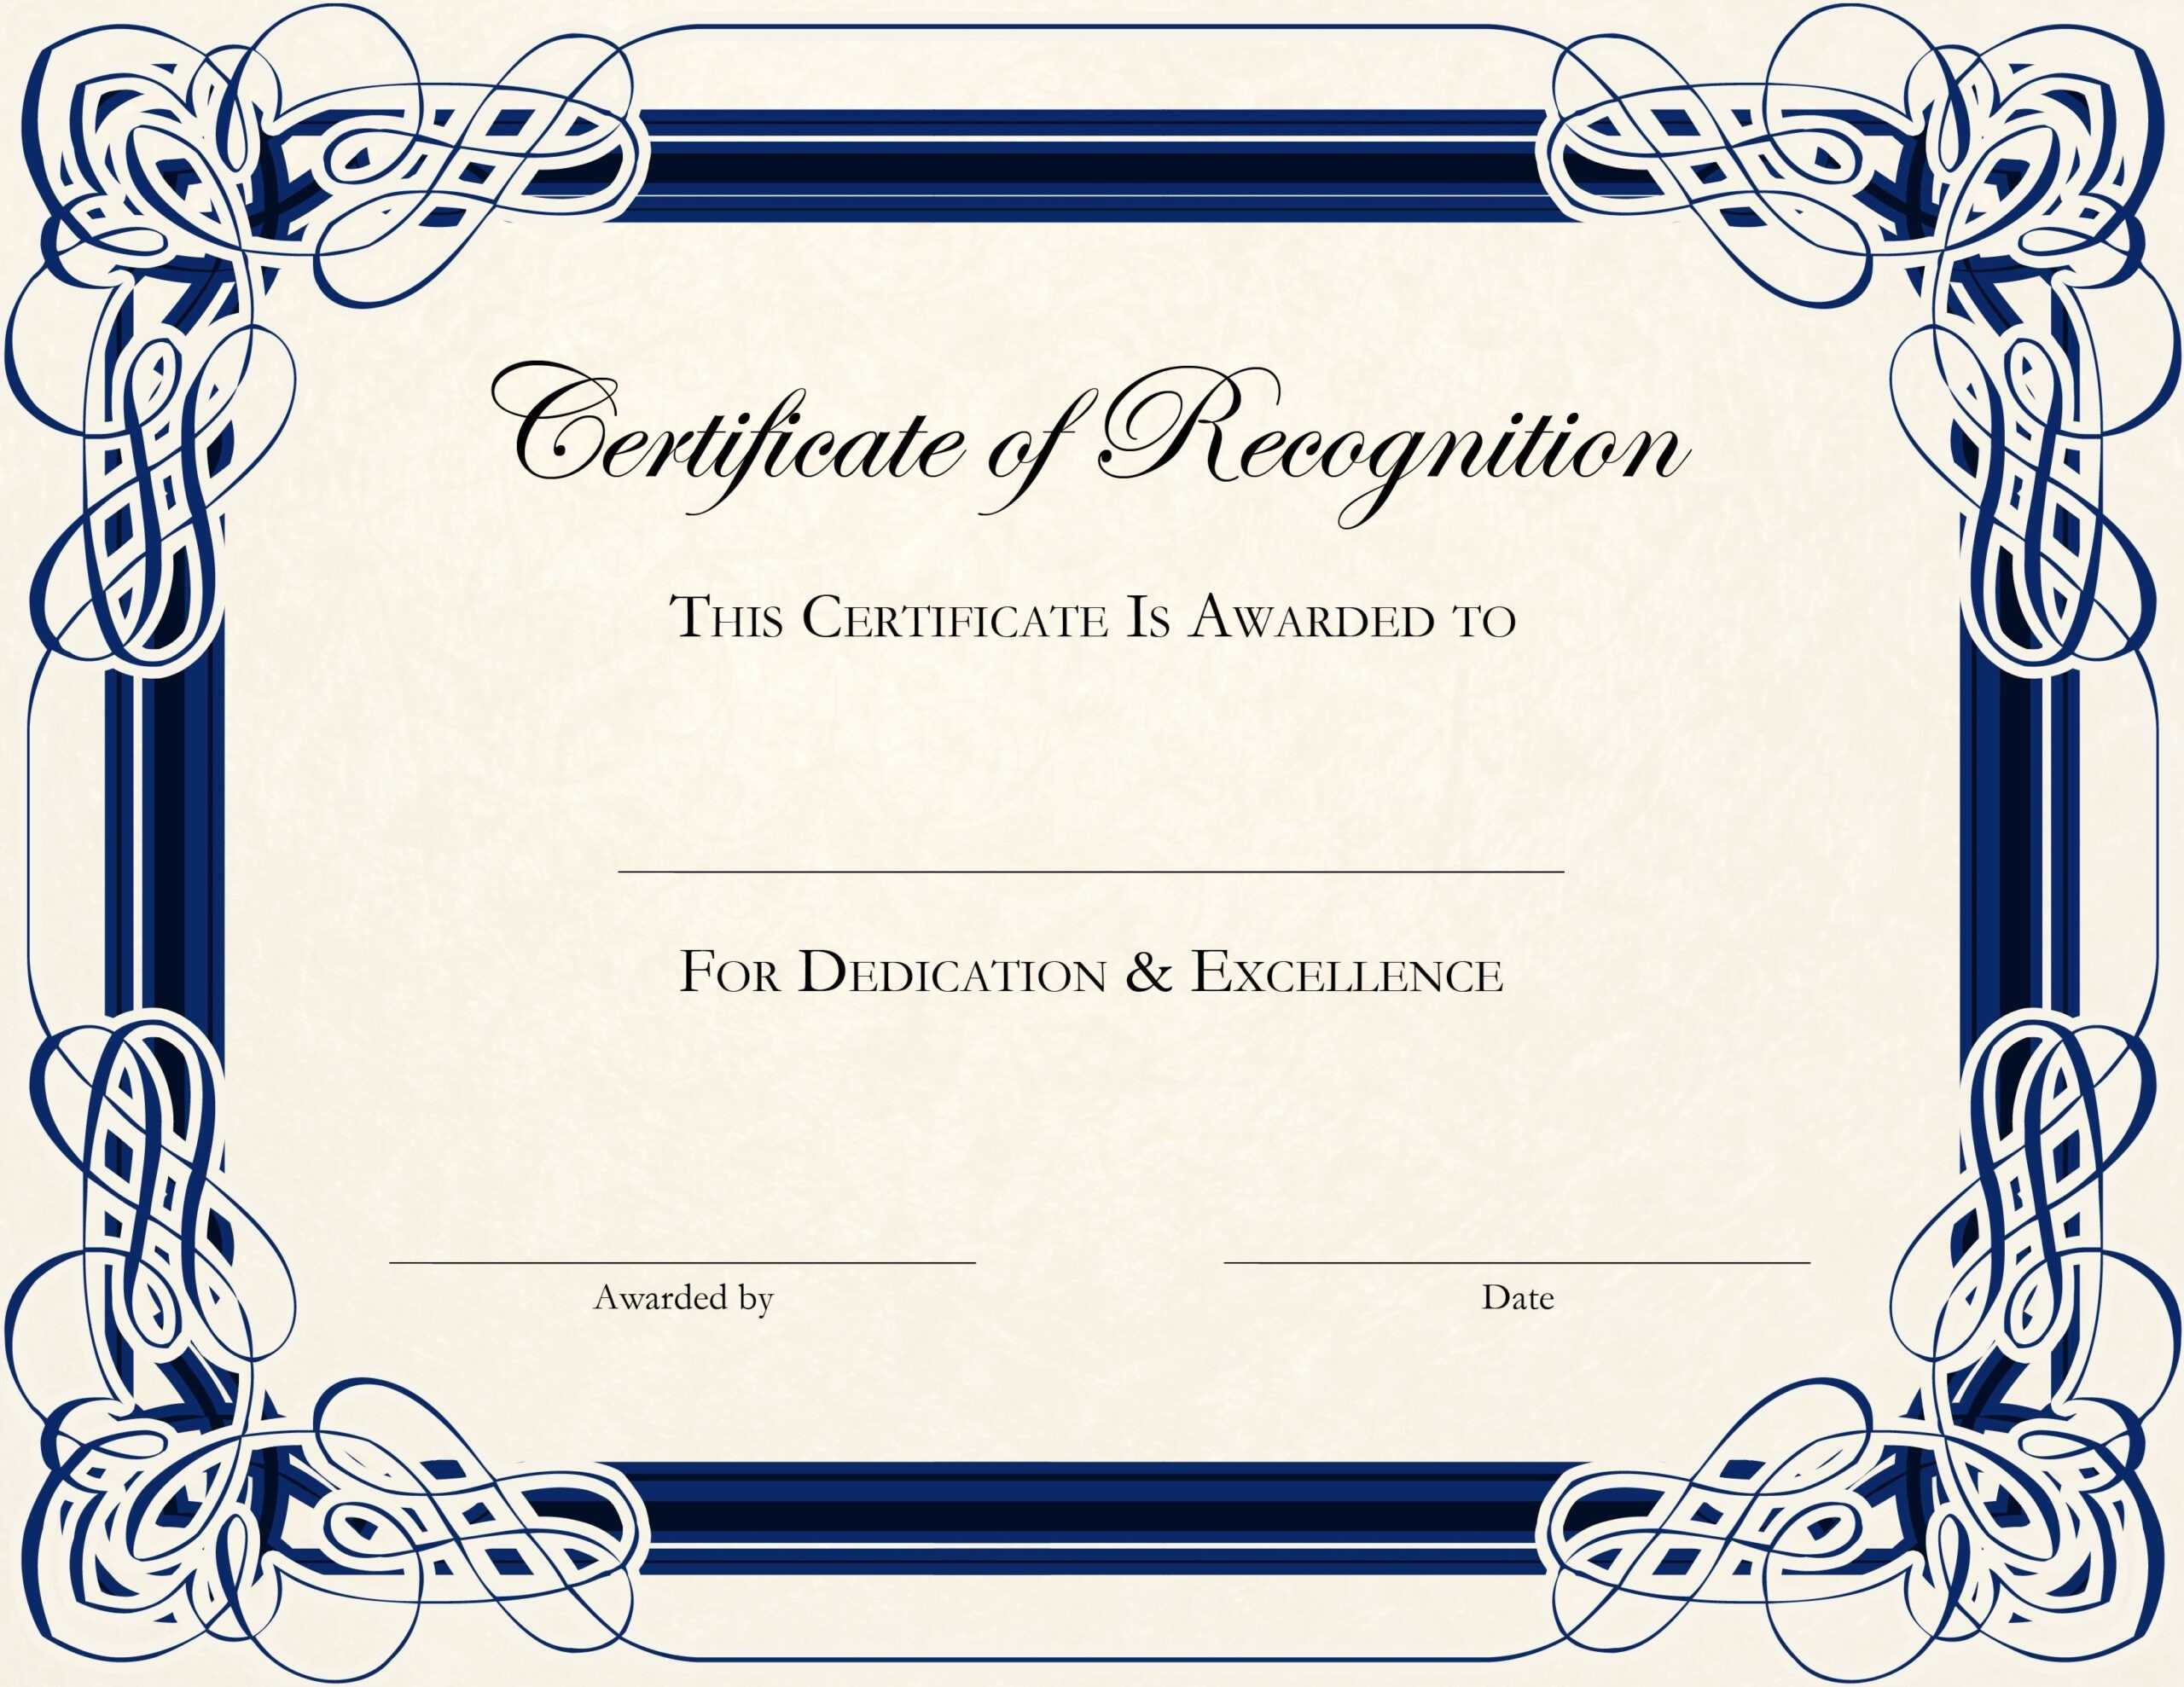 Certificate Template Designs Recognition Docs | Blankets Throughout Free Art Certificate Templates